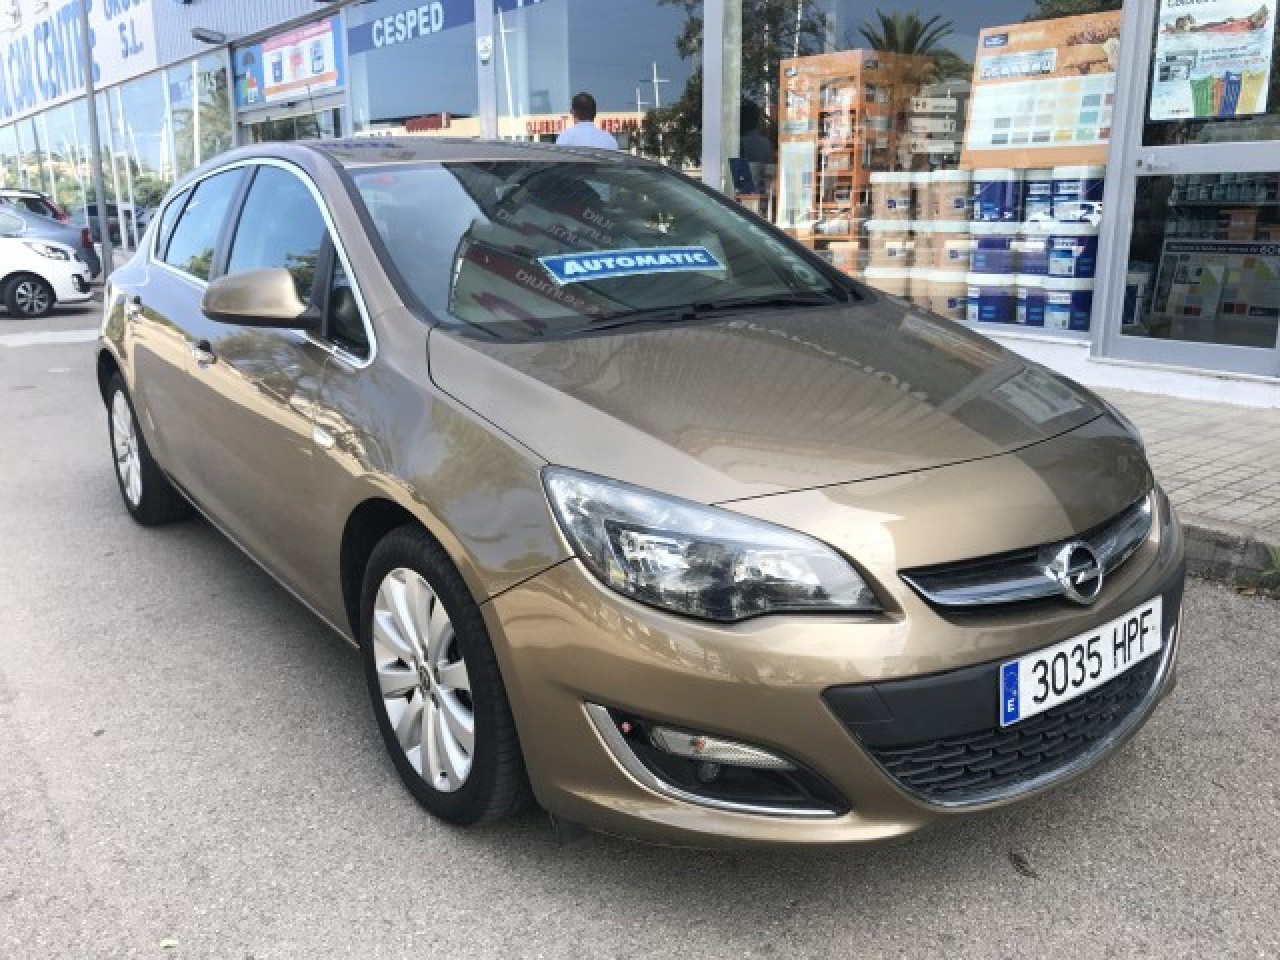 Opel Astra 1.4 Turbo 140BHP Excellence Automatic Hatchback Photo